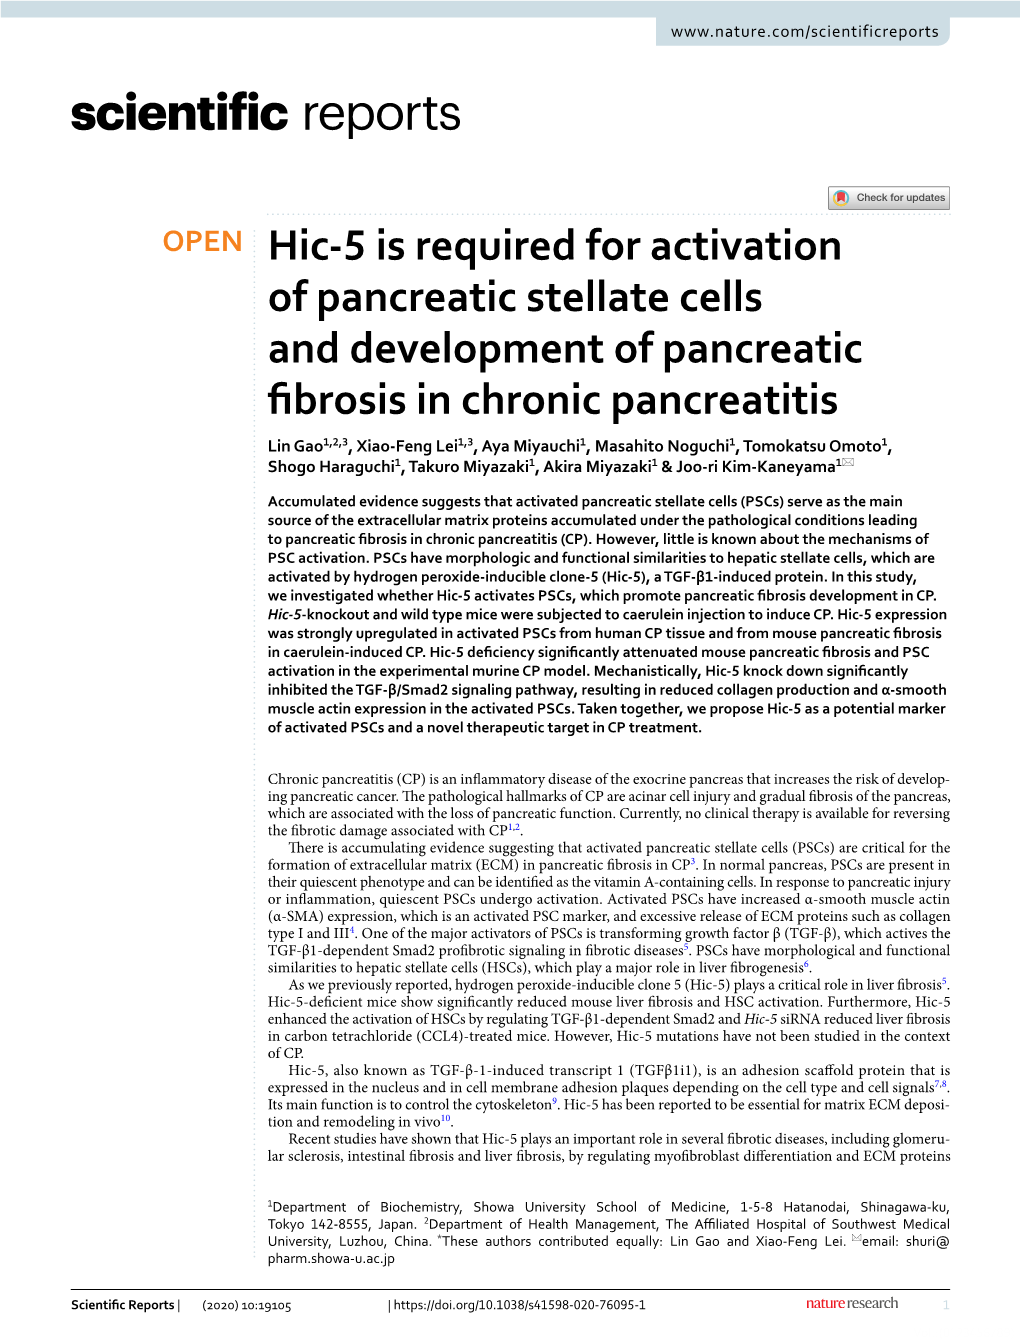 Hic-5 Is Required for Activation of Pancreatic Stellate Cells